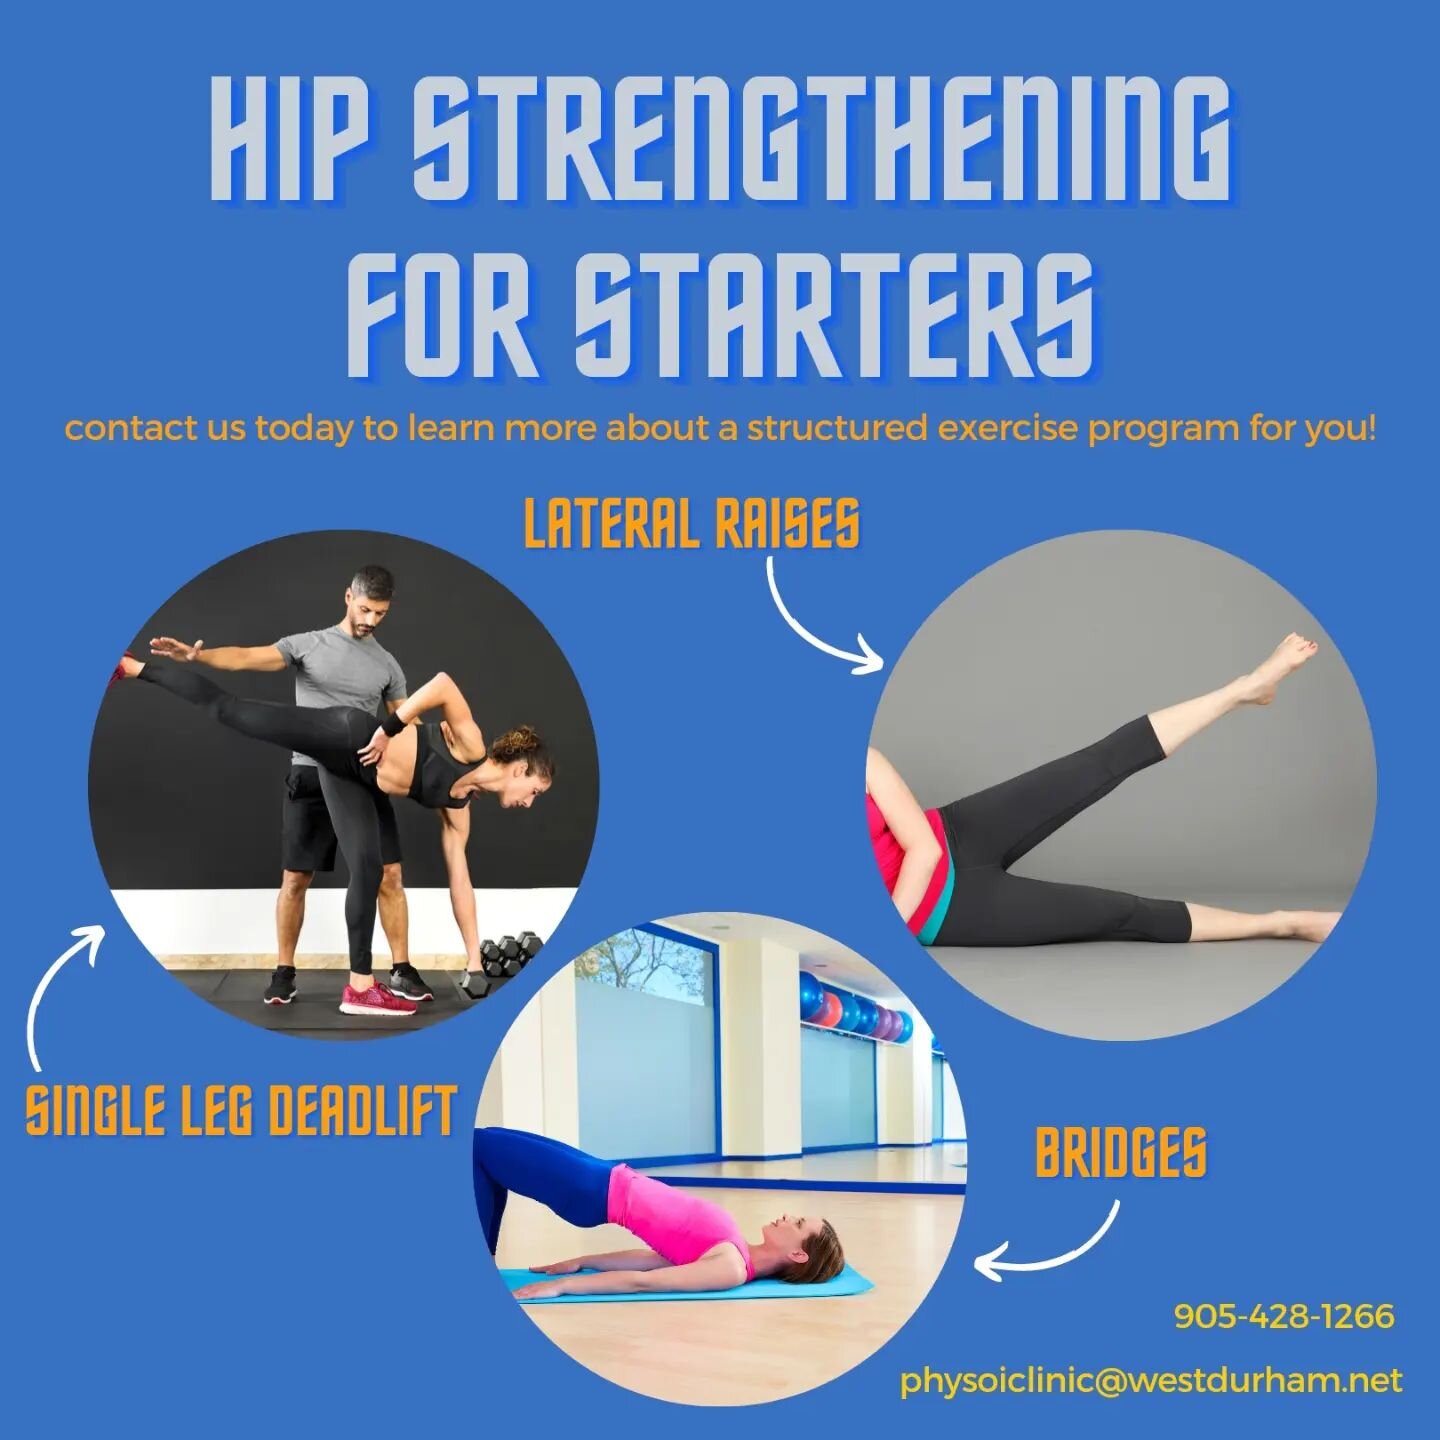 If you read our recent post about hip impingement syndrome, you may be wondering what exercises may be helpful in strengthening the muscles that support the hip joint.

Take a look at these exercises for starters ☝️!

Contact us today to book a consu